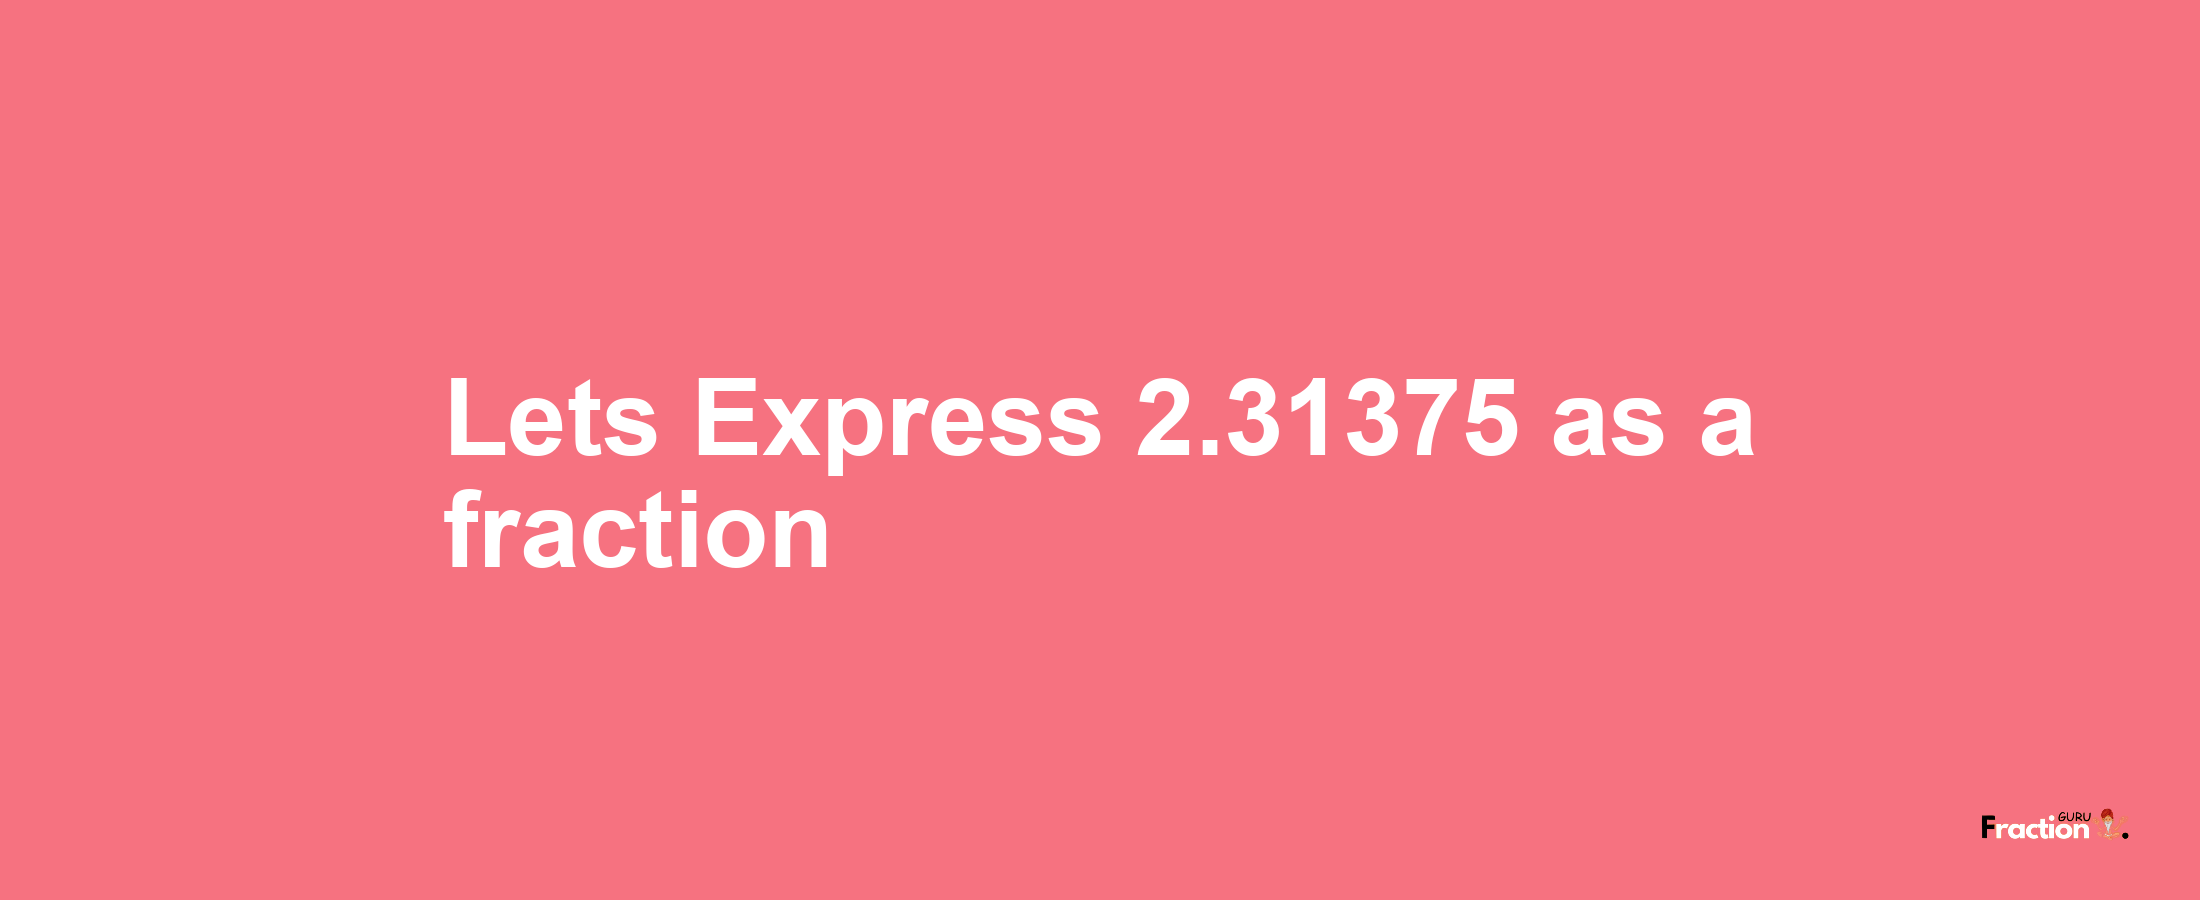 Lets Express 2.31375 as afraction